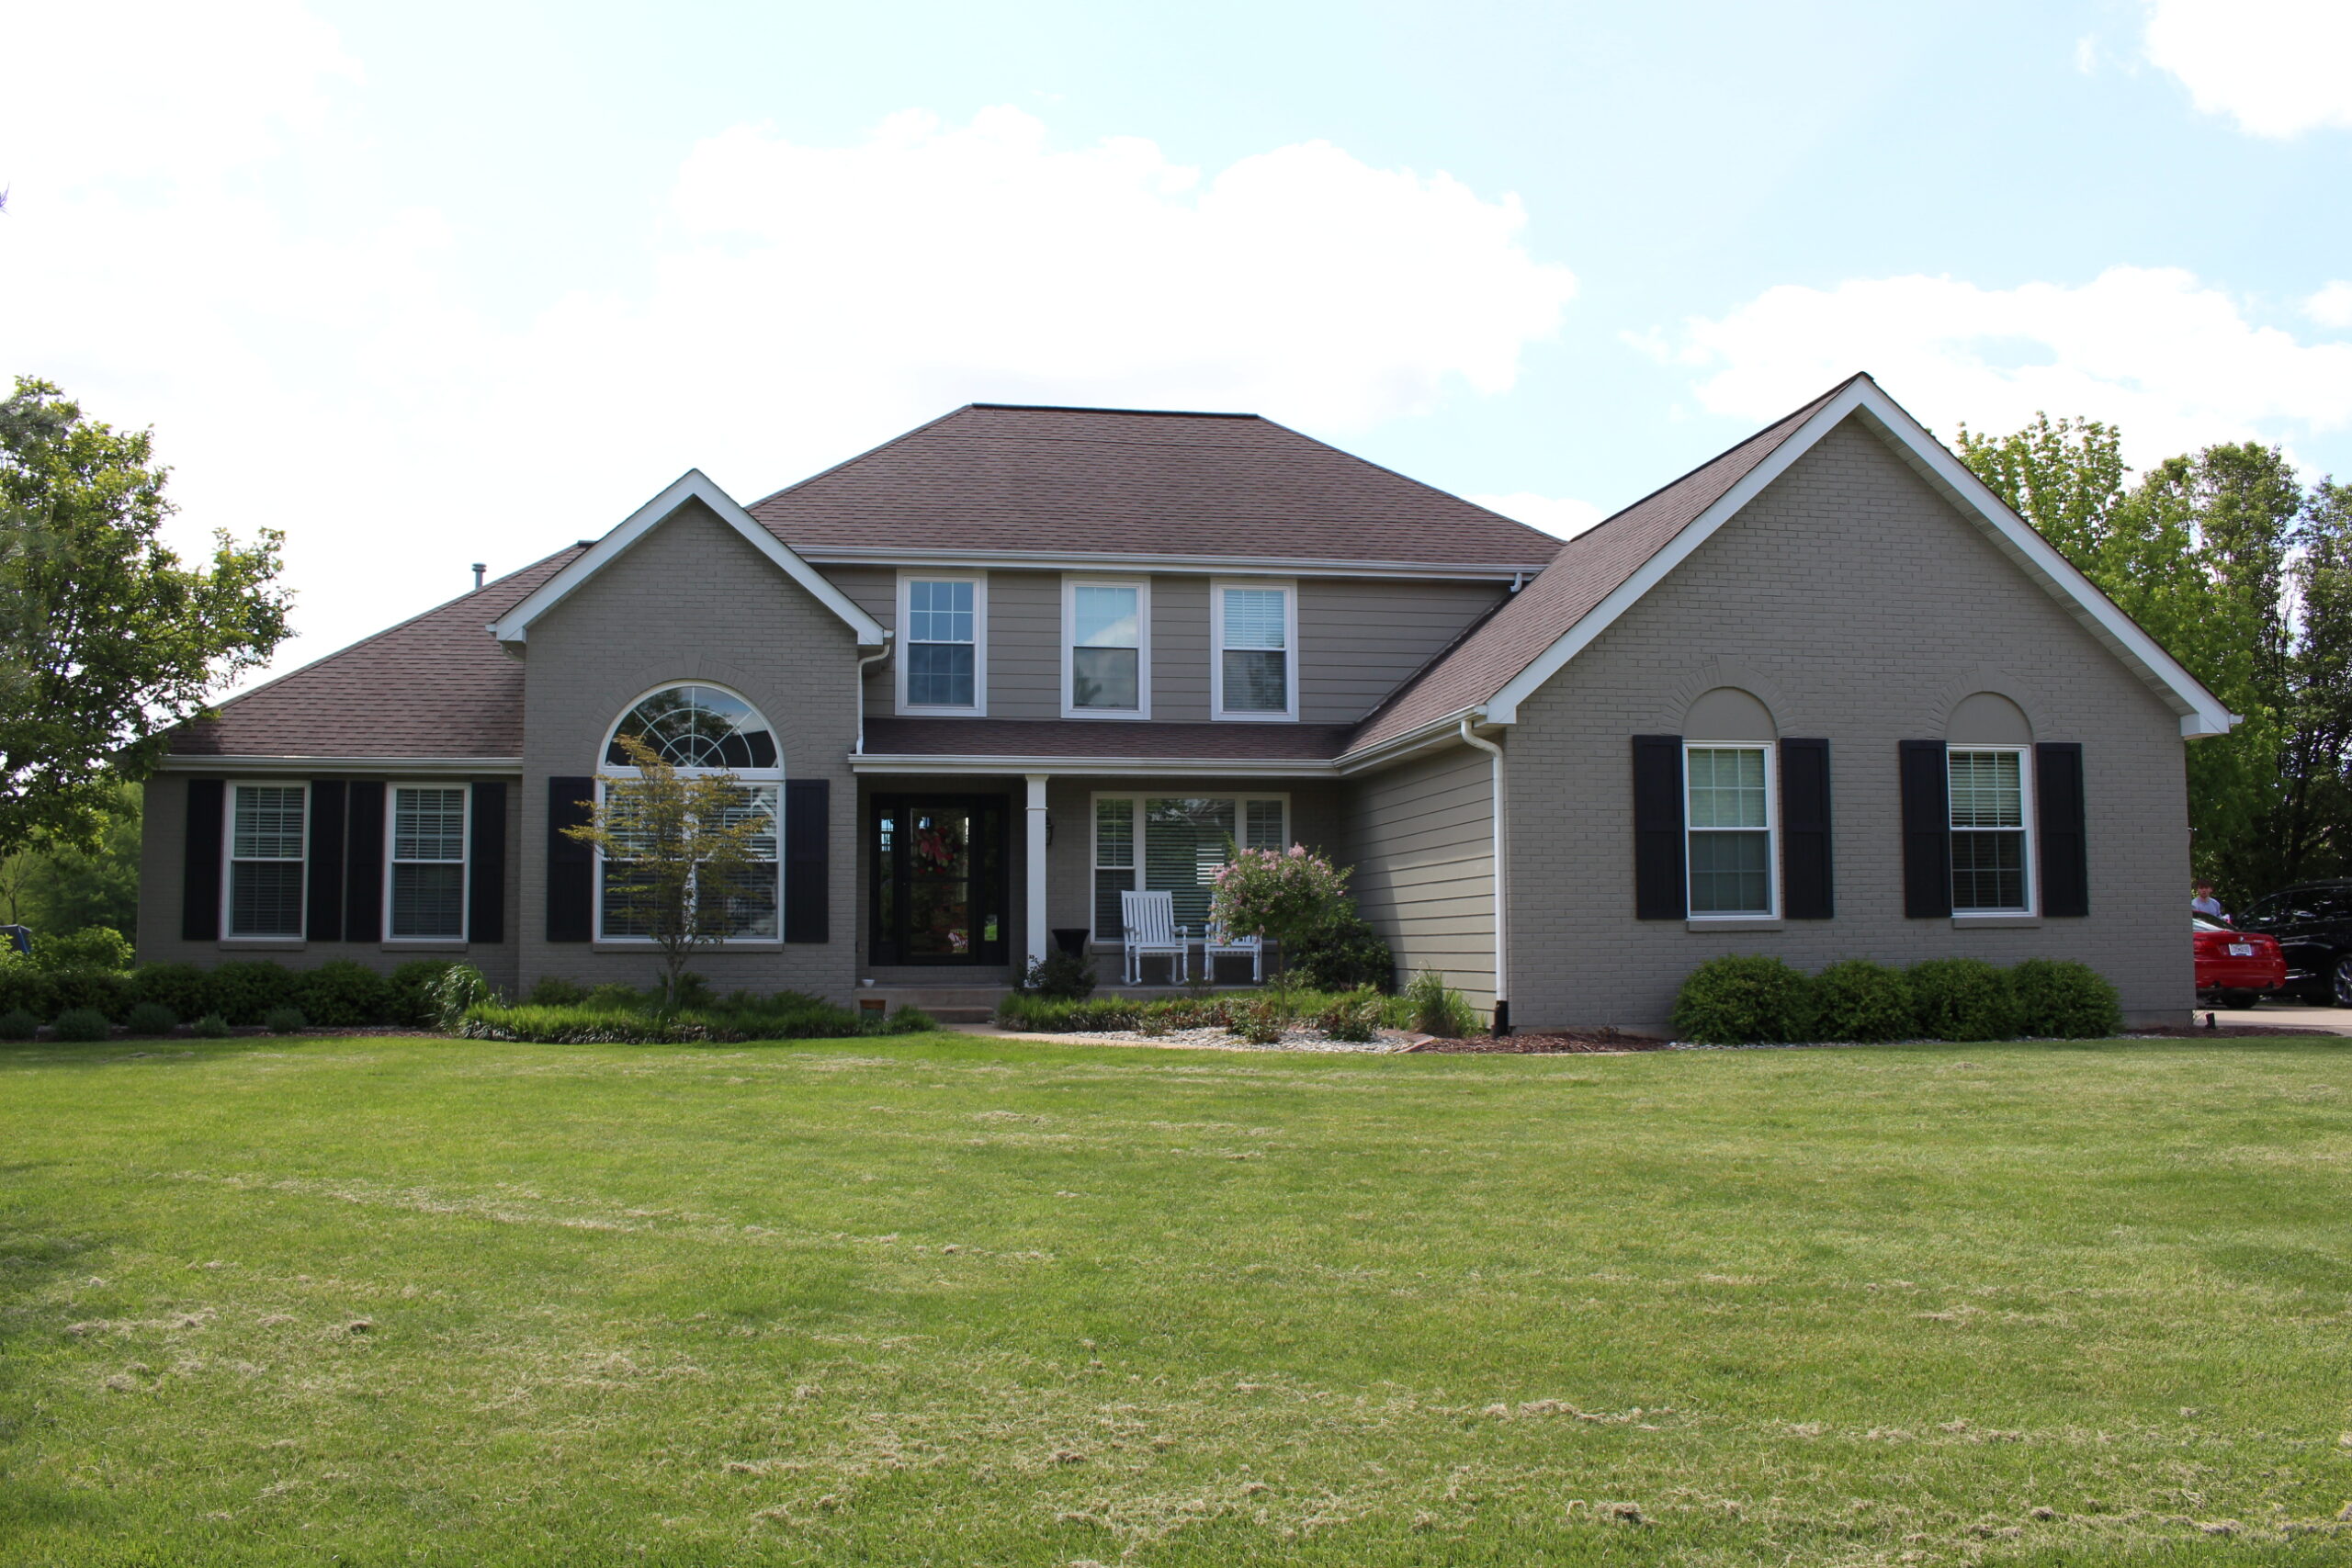 Home with window replacement in Chesterfield, MO